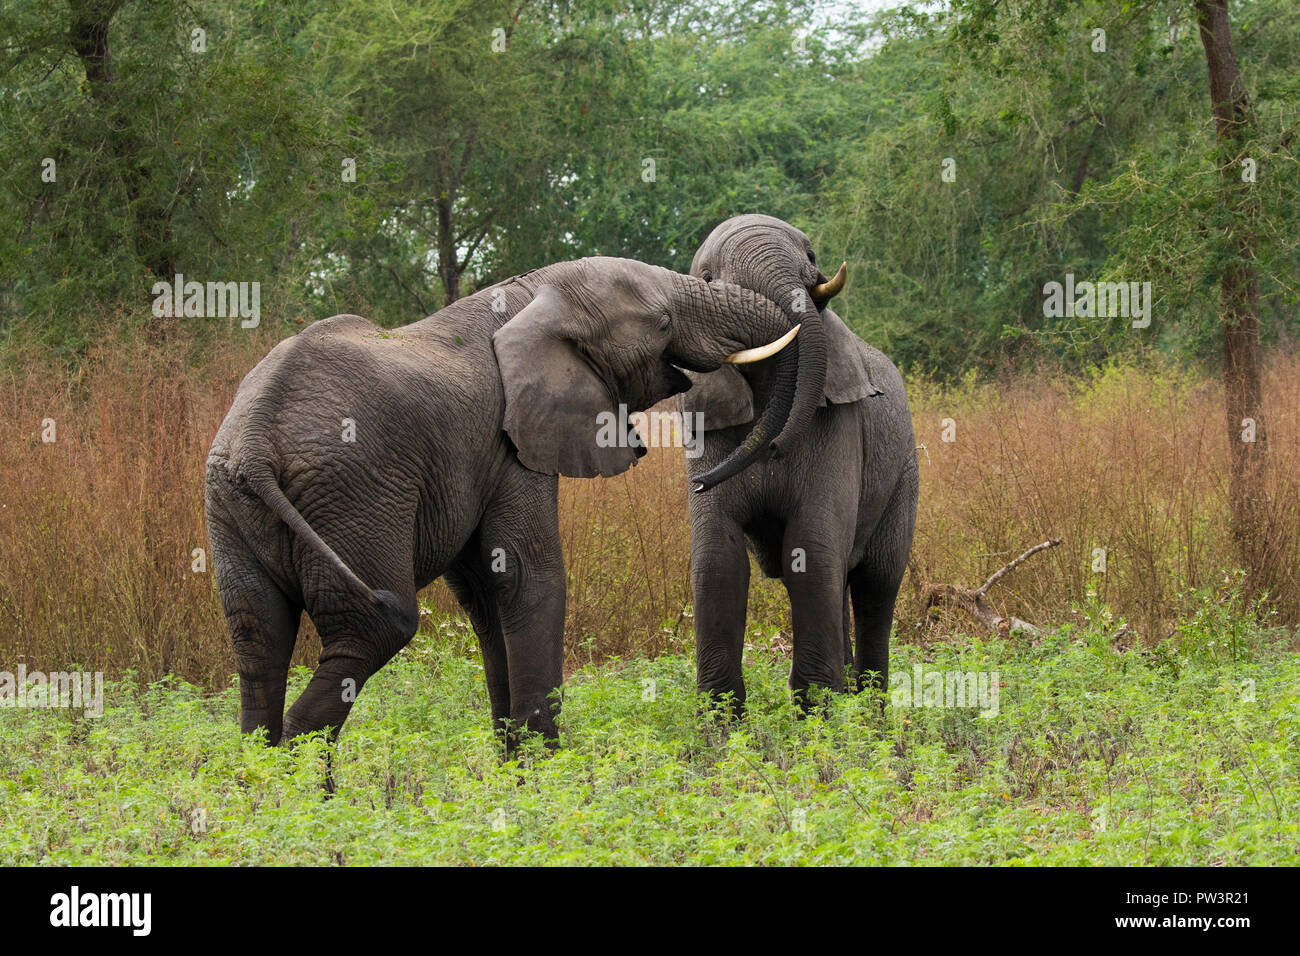 AFRICAN ELEPHANT (Loxodonta africana) two young males bonding, Gorongosa National Park, Mozambique. Vulnerable species Stock Photo